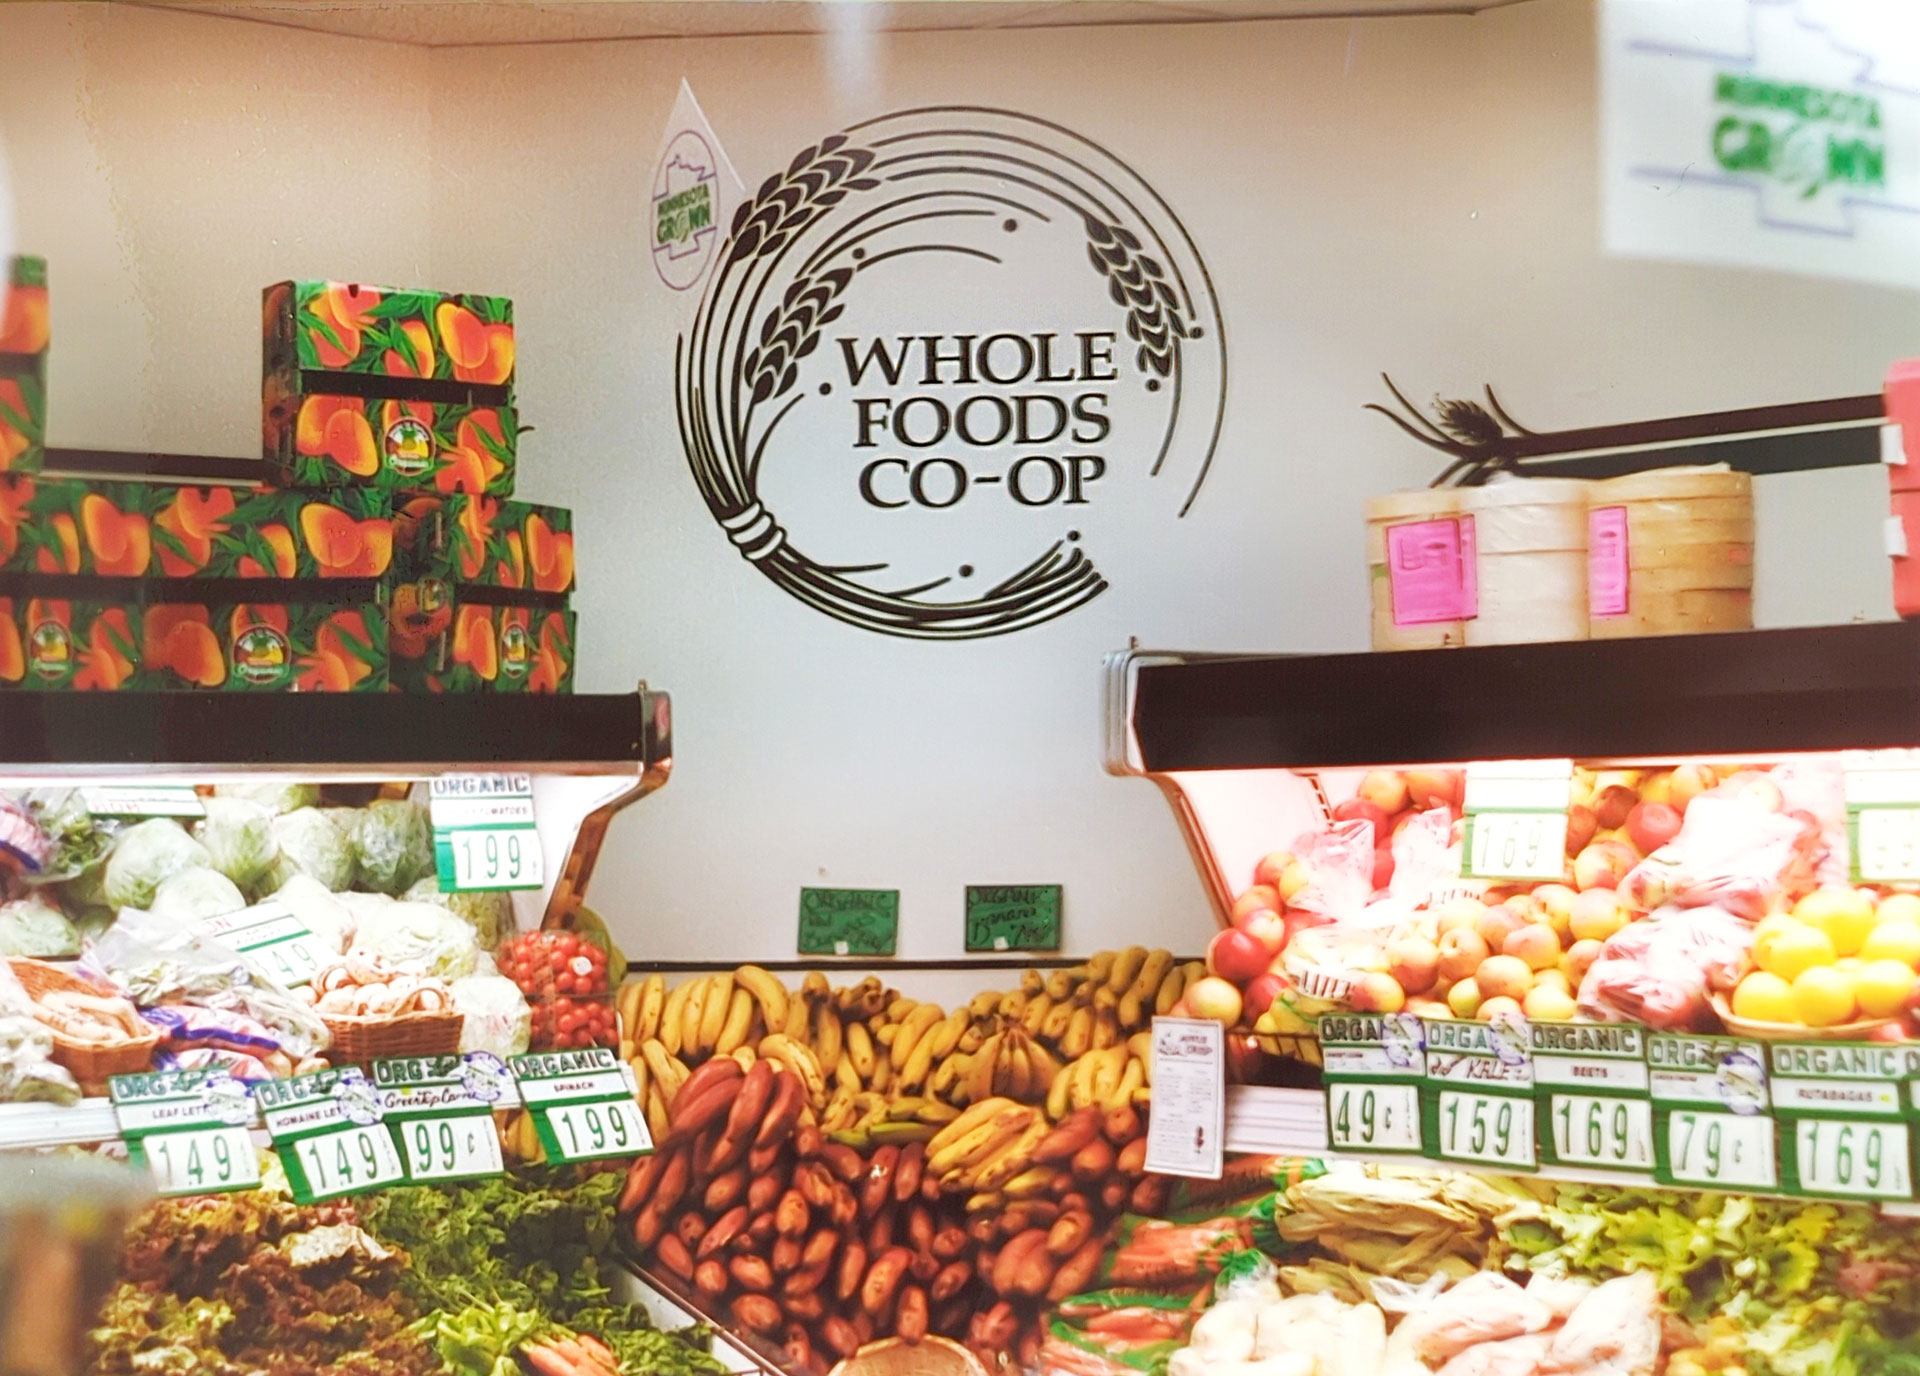 A colorful supermarket produce section featuring fresh fruits and vegetables displayed on shelves. A "Whole Foods Co-Op Duluth MN" sign is prominently visible on the wall. Price tags indicate a variety of produce including bananas, apples, and leafy greens.